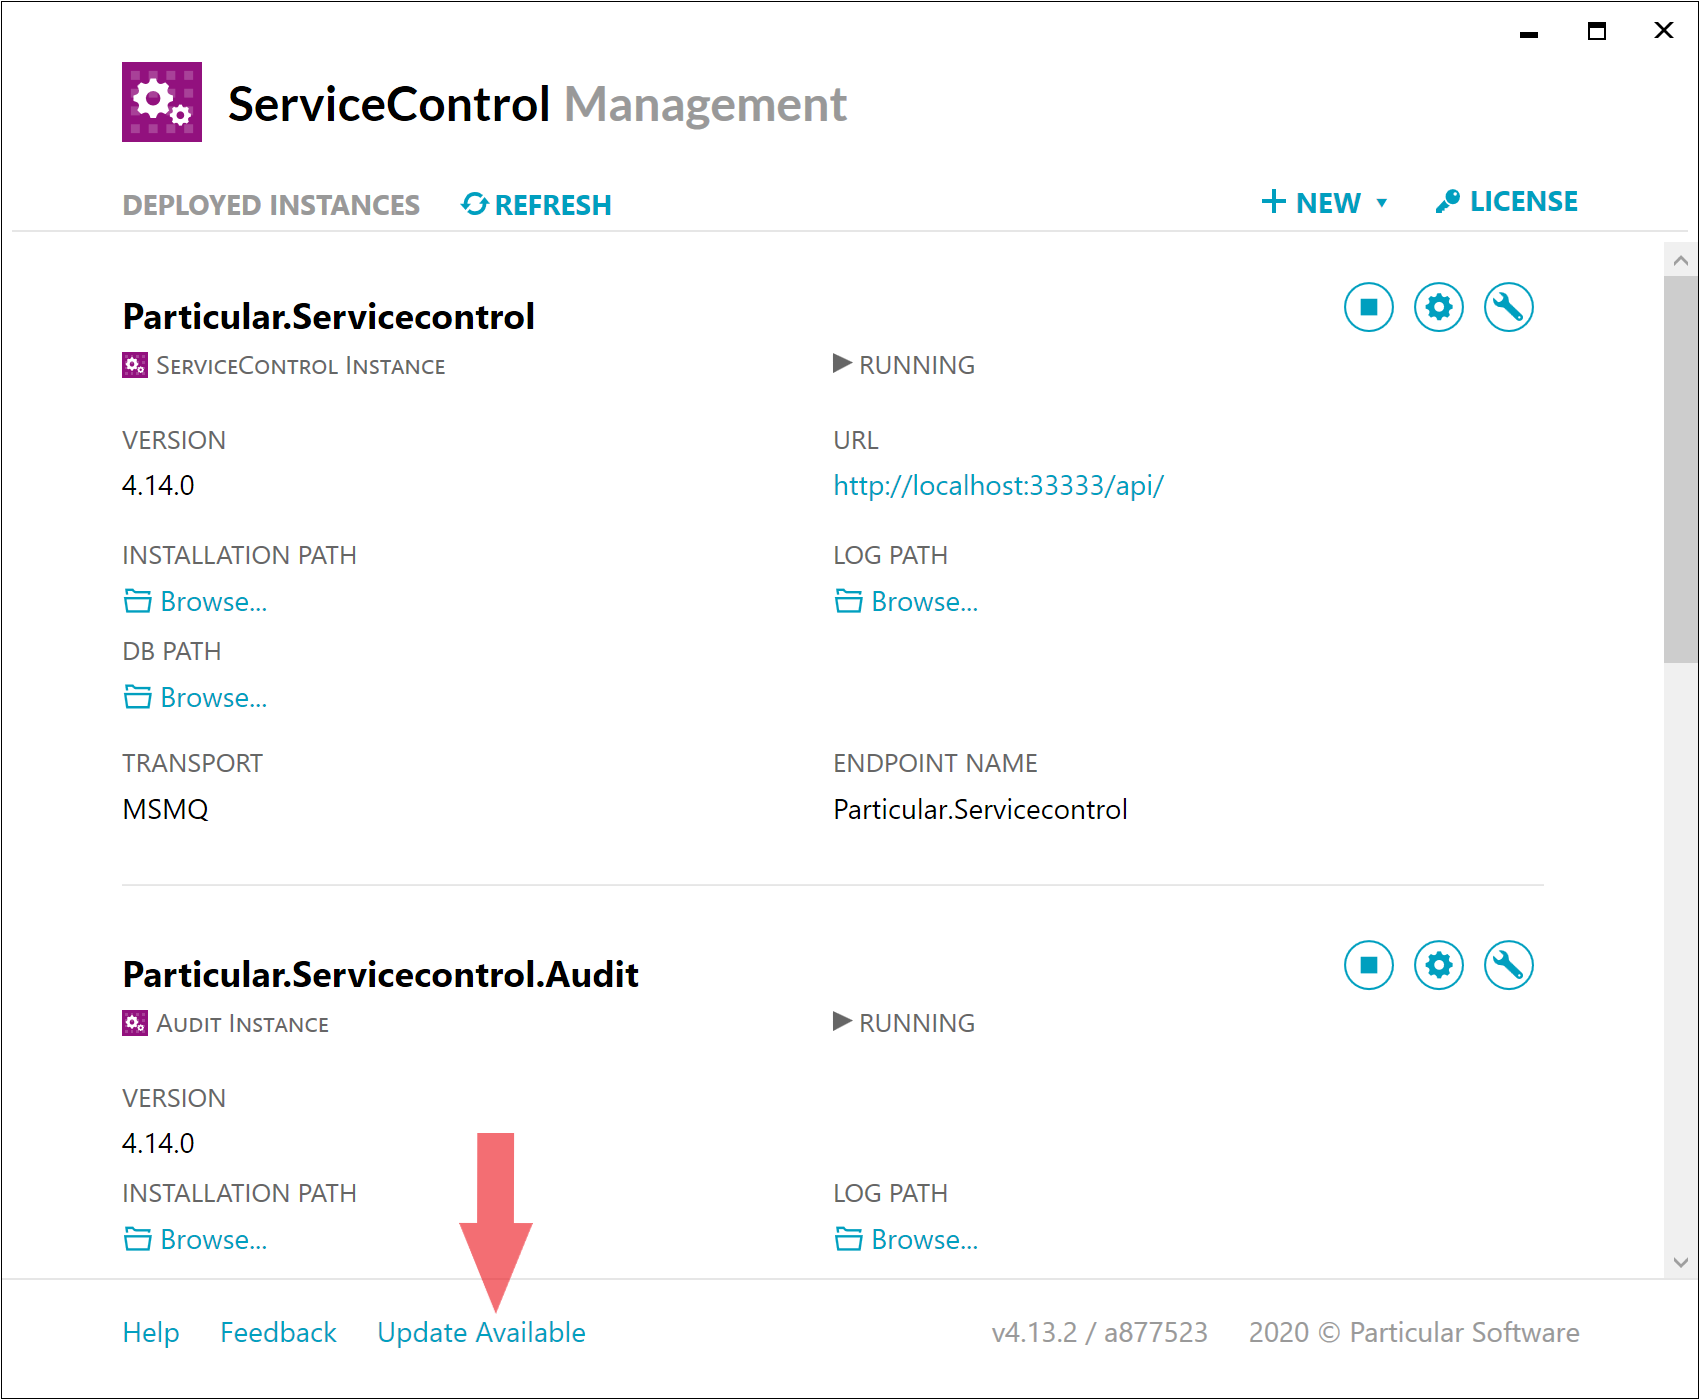 Update Check Link in ServiceControl Management Utility